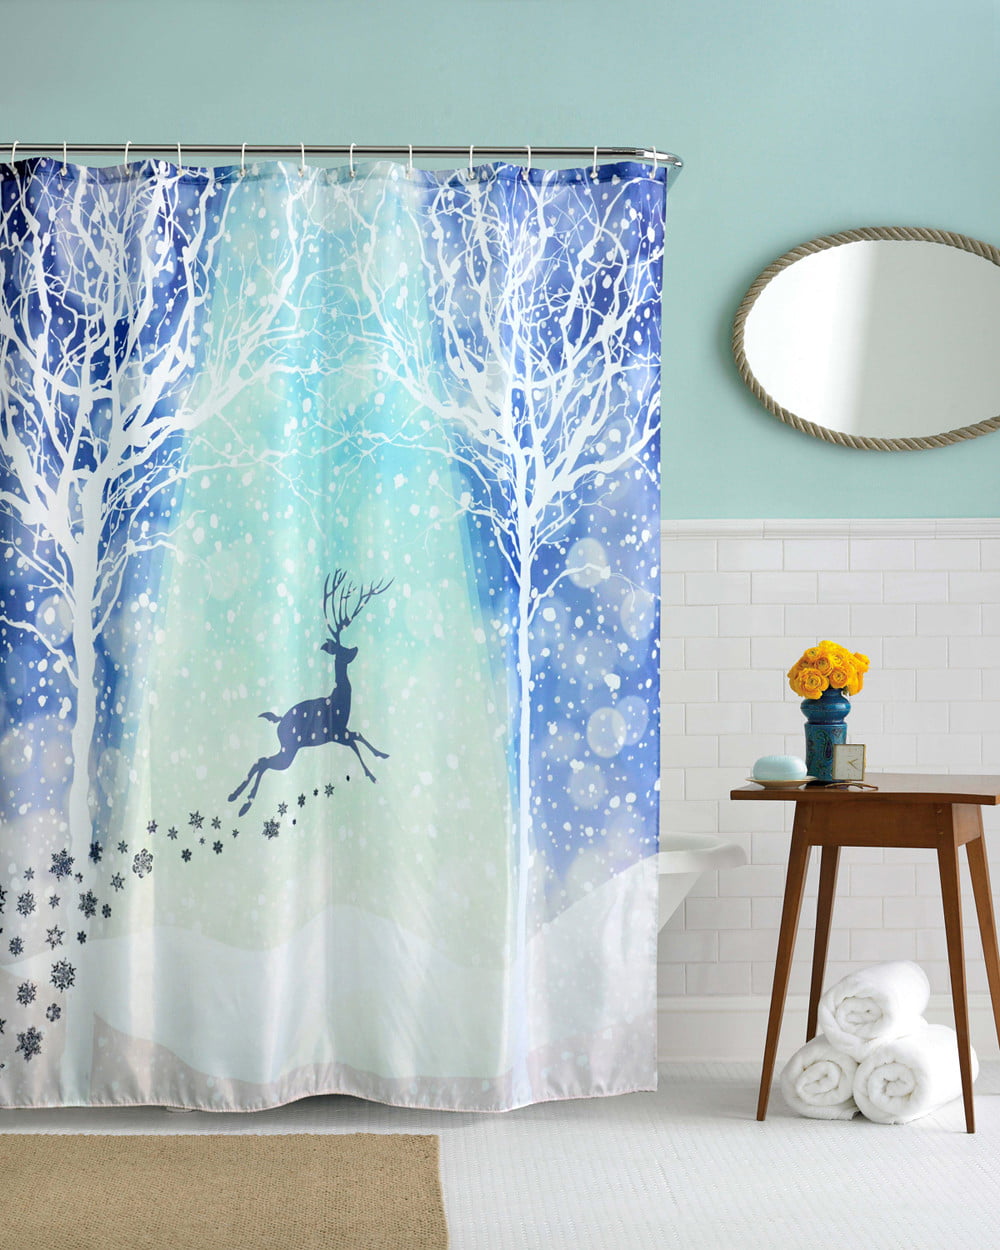 Cute Christmas Kids Waterproof Polyester Bathroom Shower Curtain Decor With Hook 